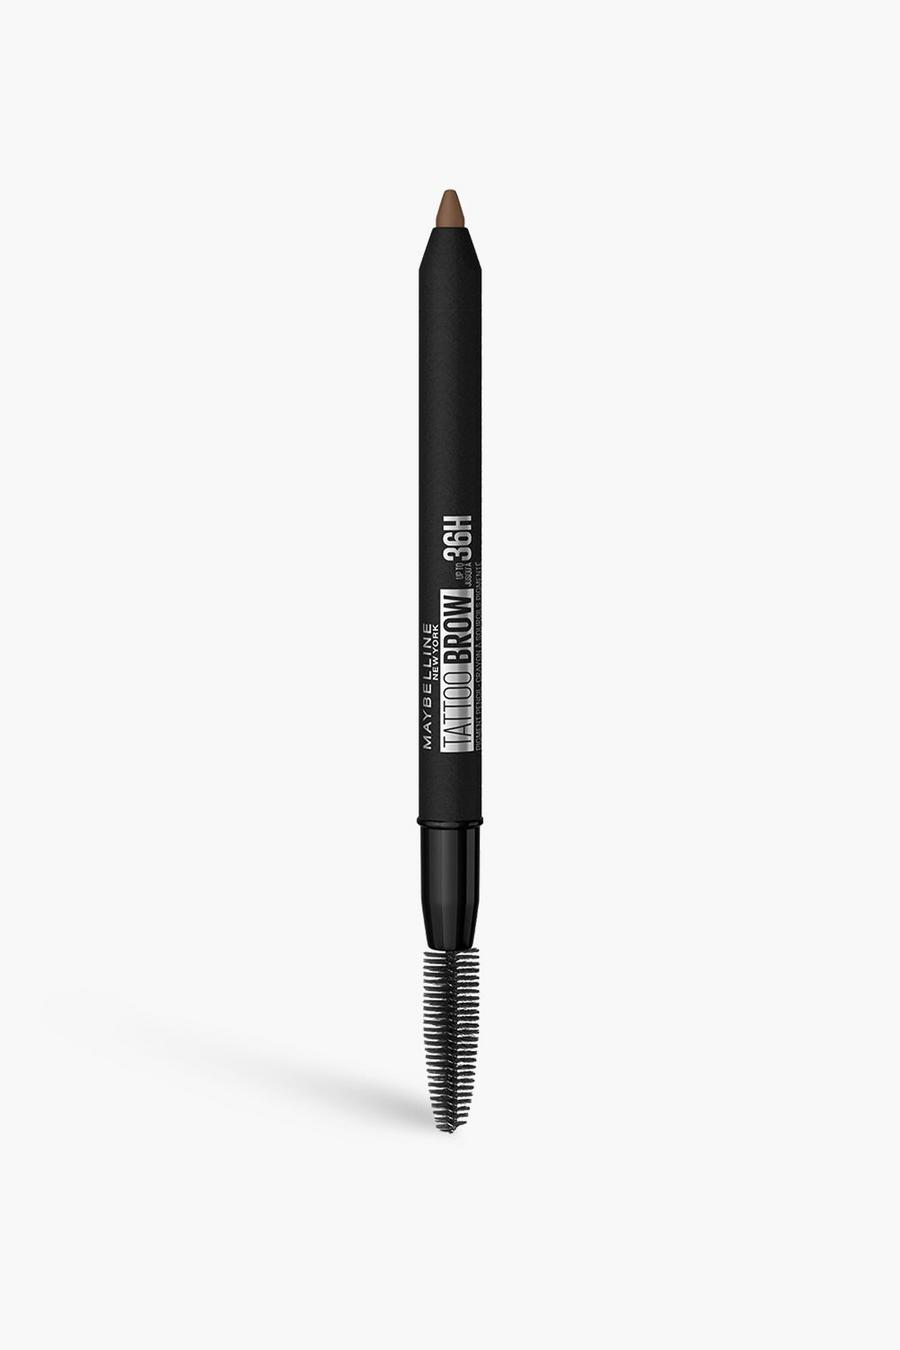 Maybelline Tattoo Brow Semi Perm Soft Brown 3 image number 1